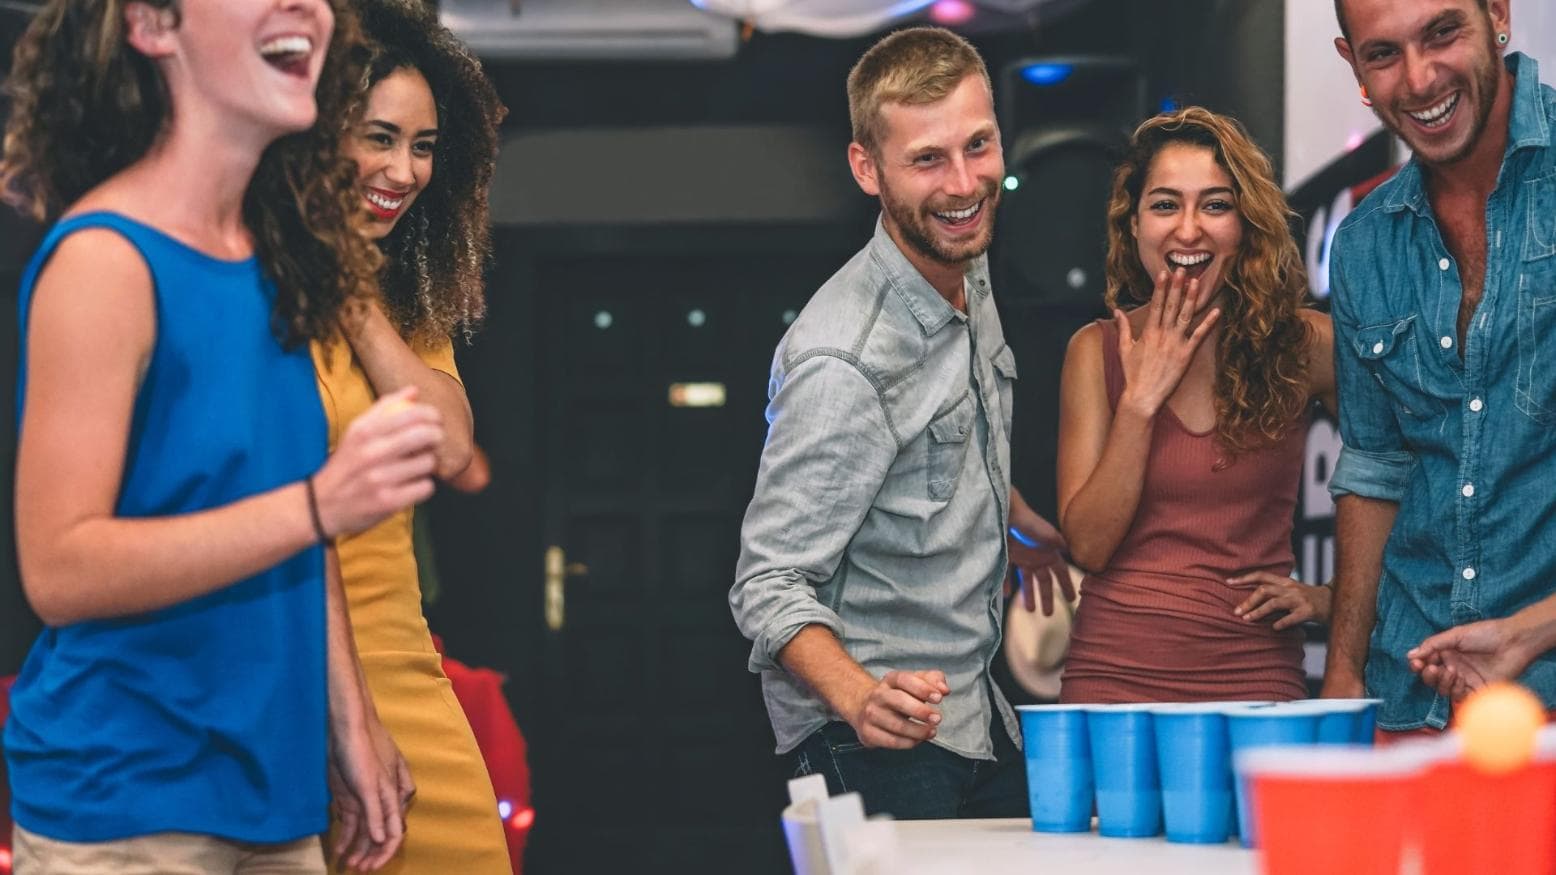 20+ College Party Games for the Best Night Ever!